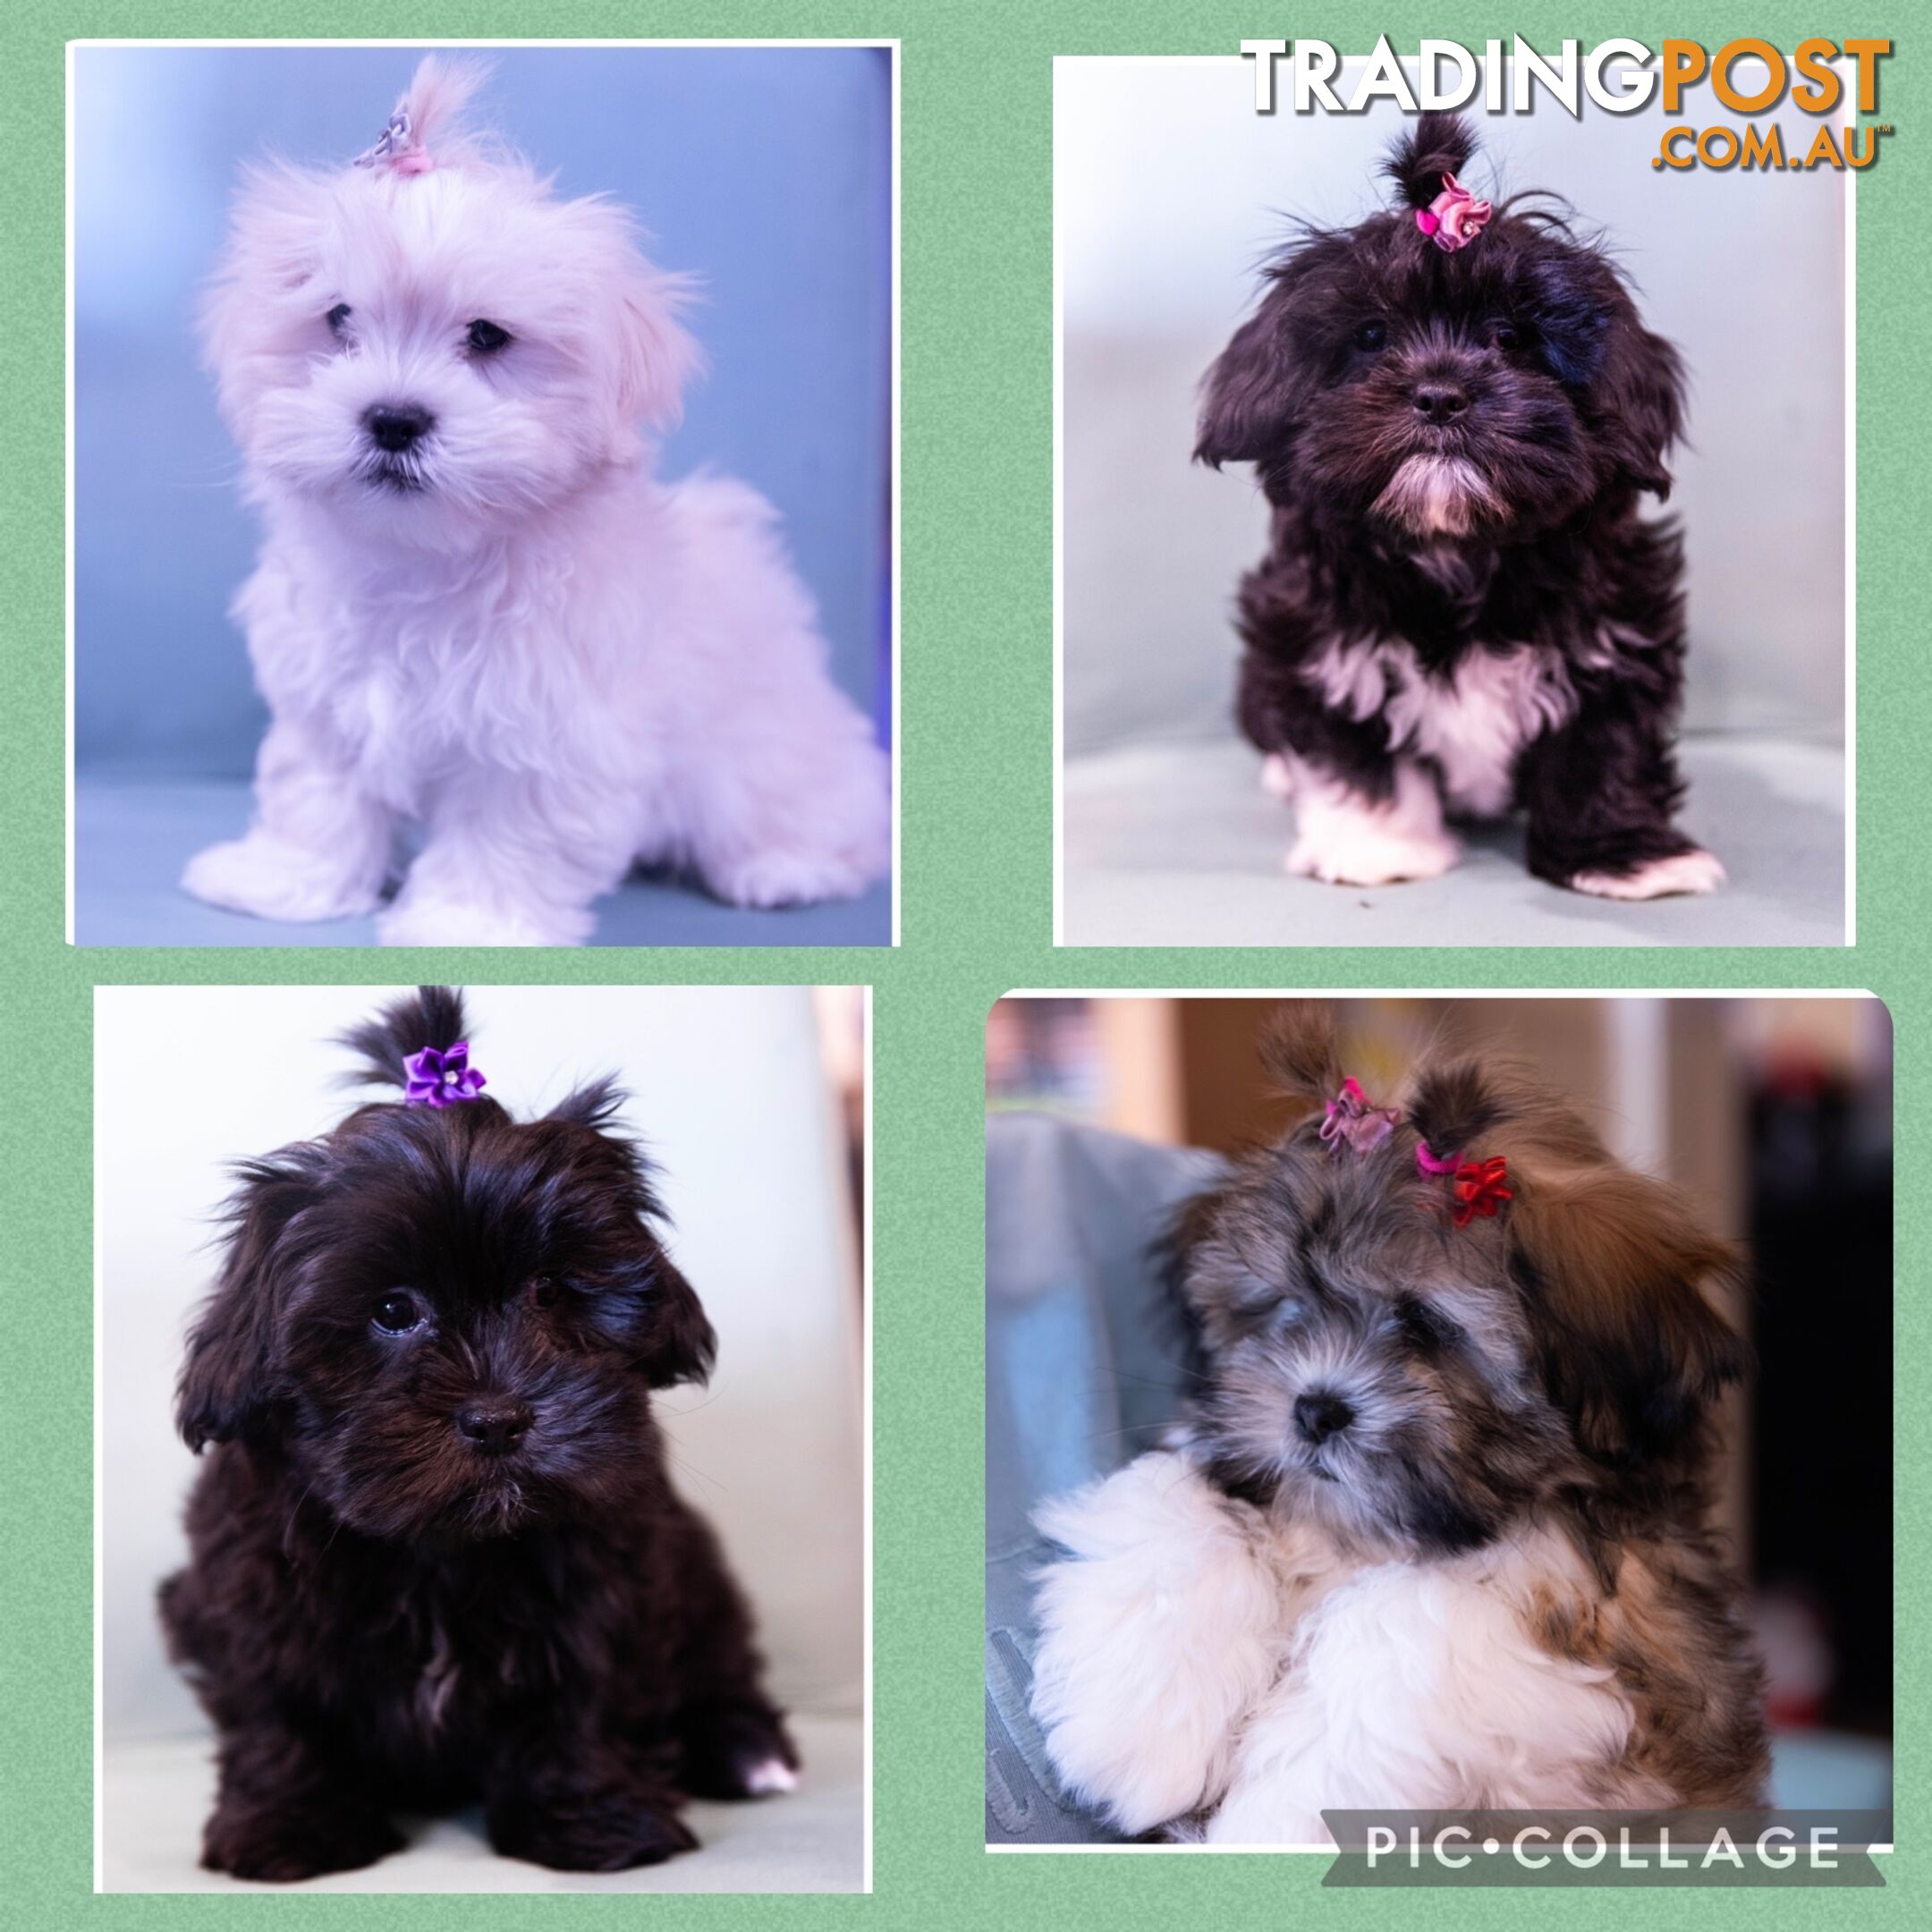 Purebred Lhasa Apso puppies. Toilet trained. Registered Breeder.